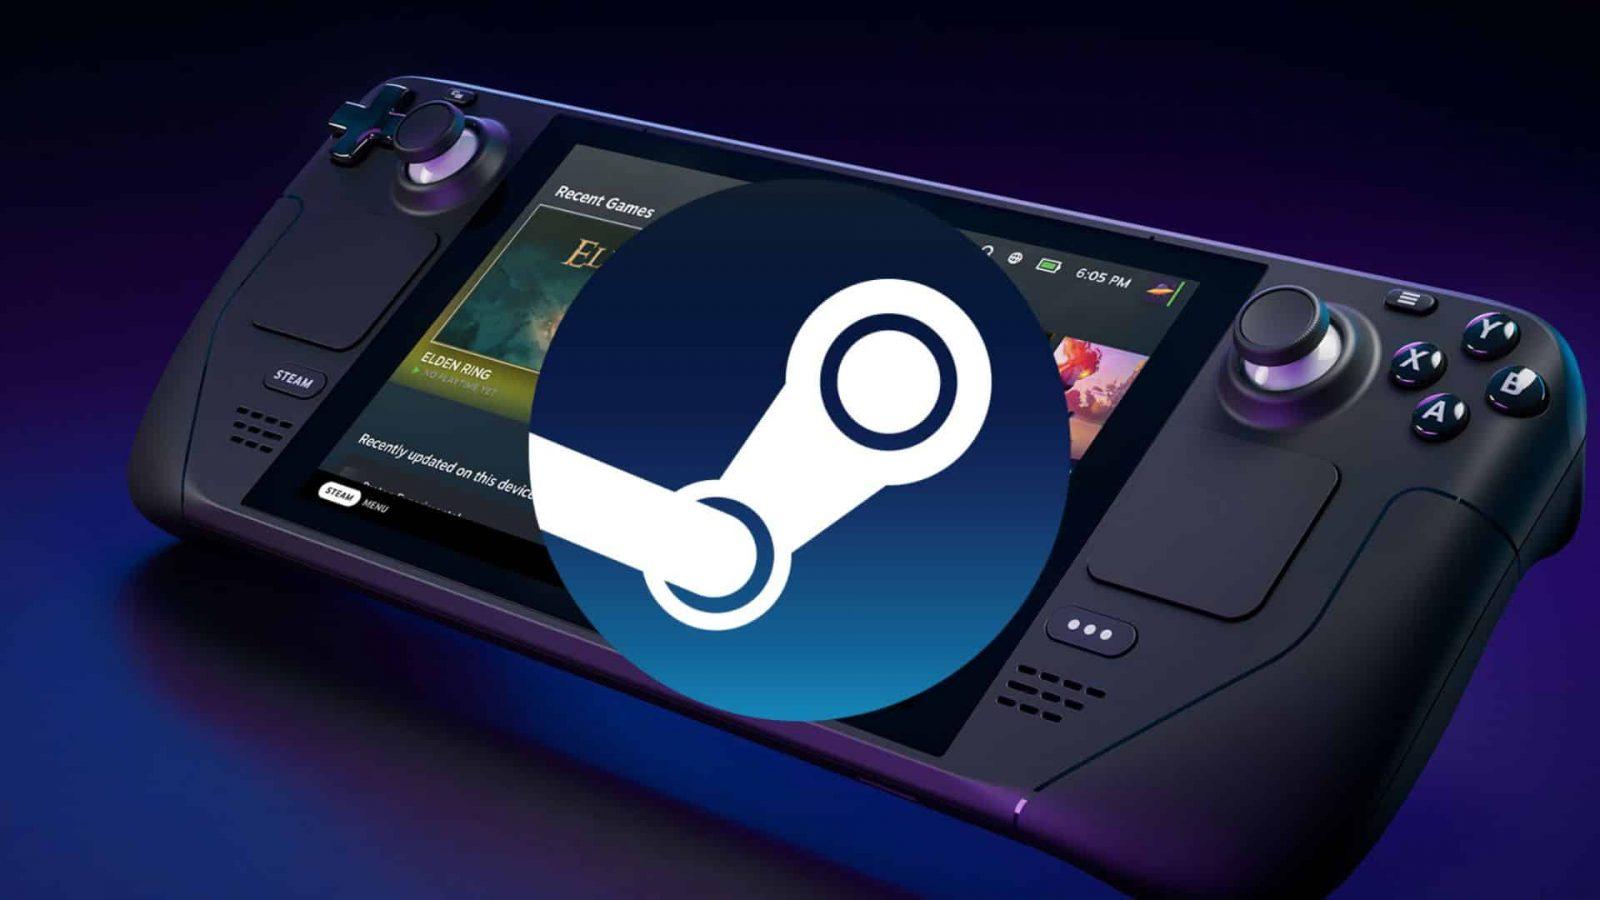 Steam Deck, one month later - The Verge